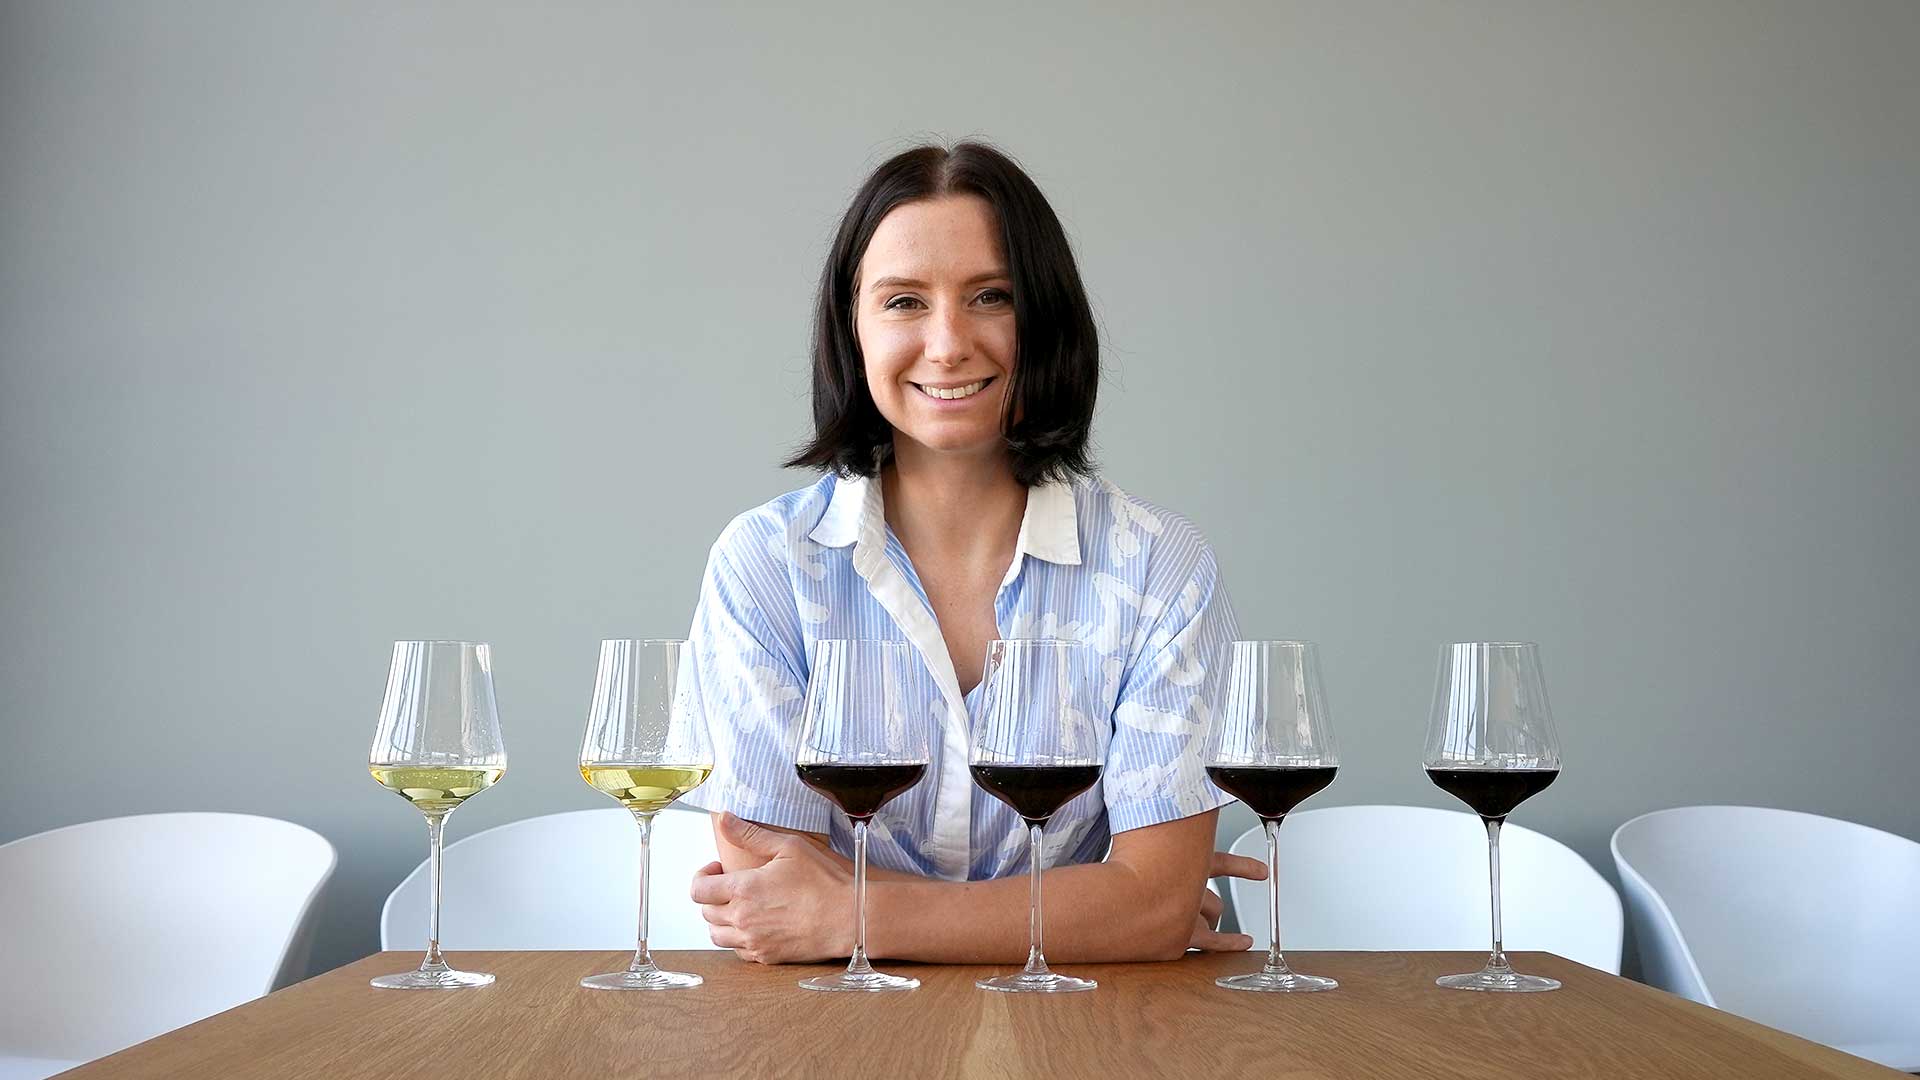 Madeline Puckette with six Napa Valley wines